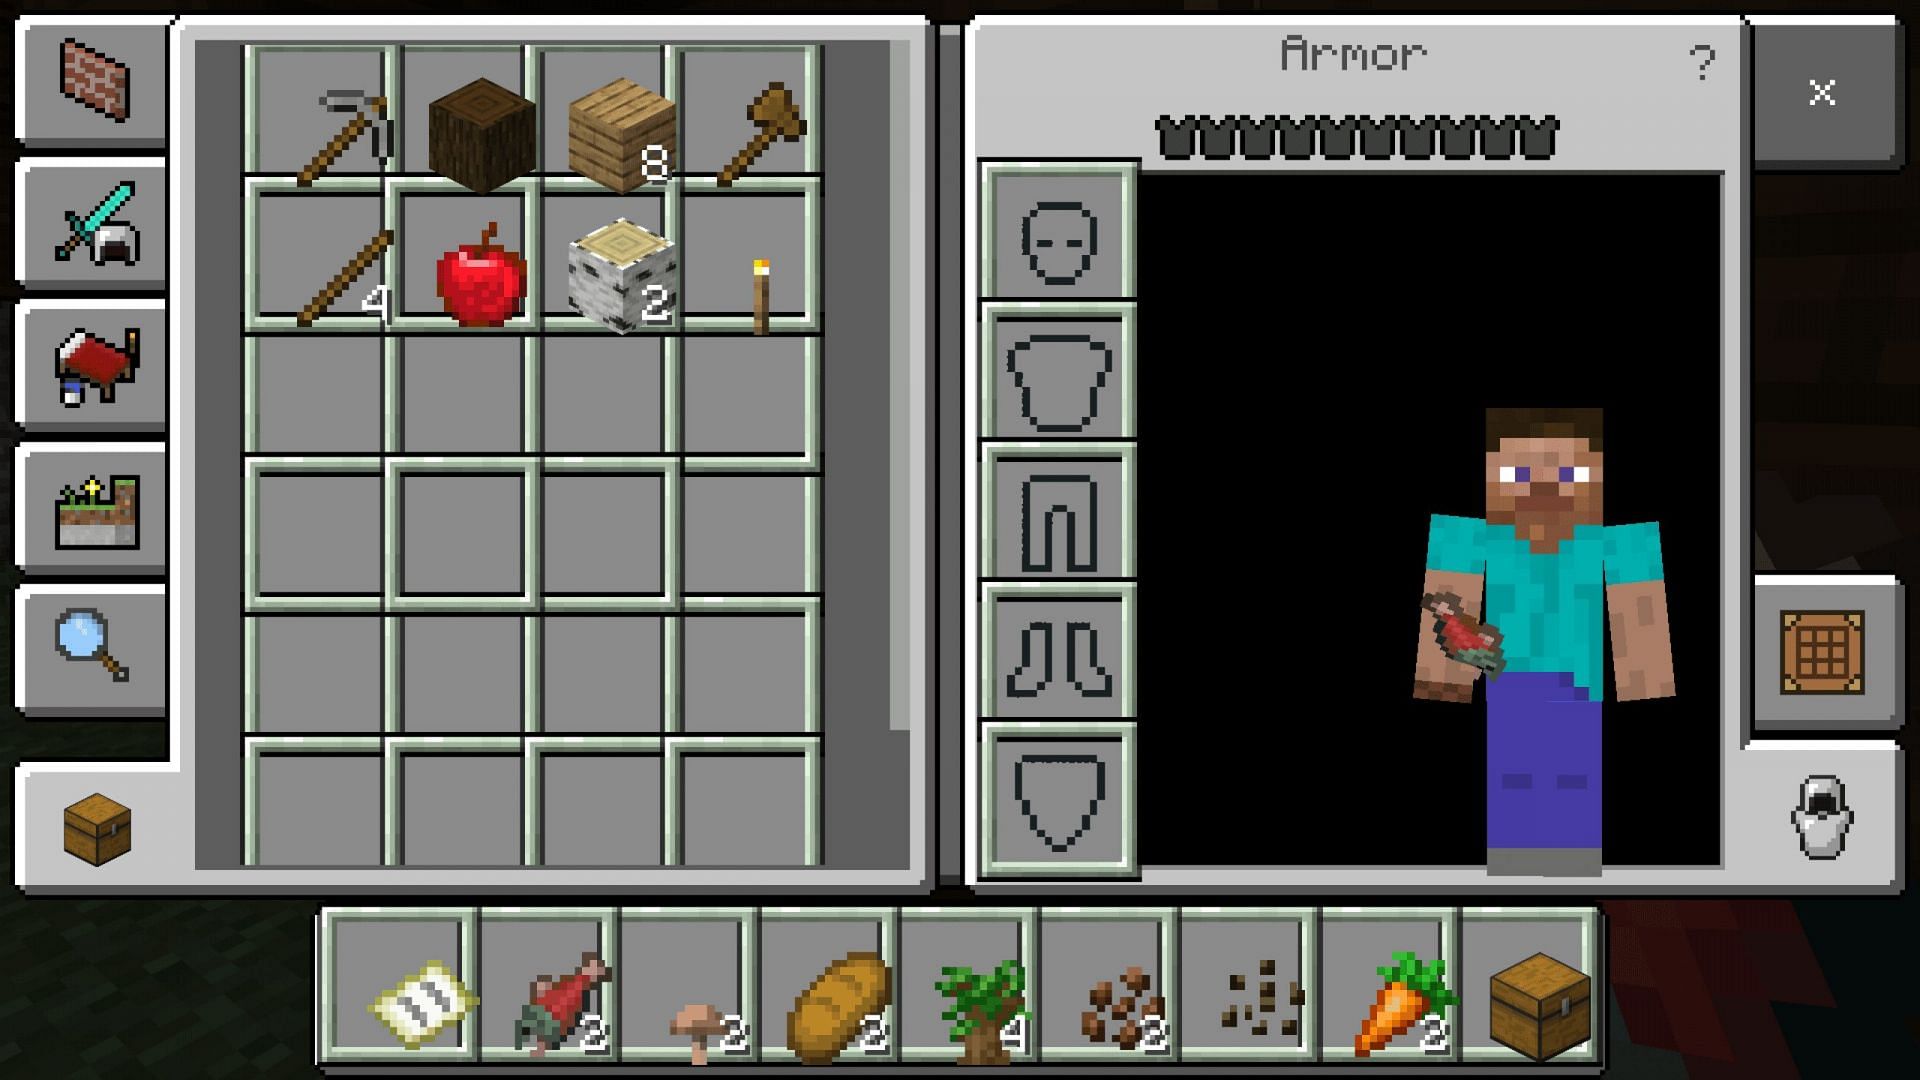 The inventory screen in Minecraft (Image via Minecraft)